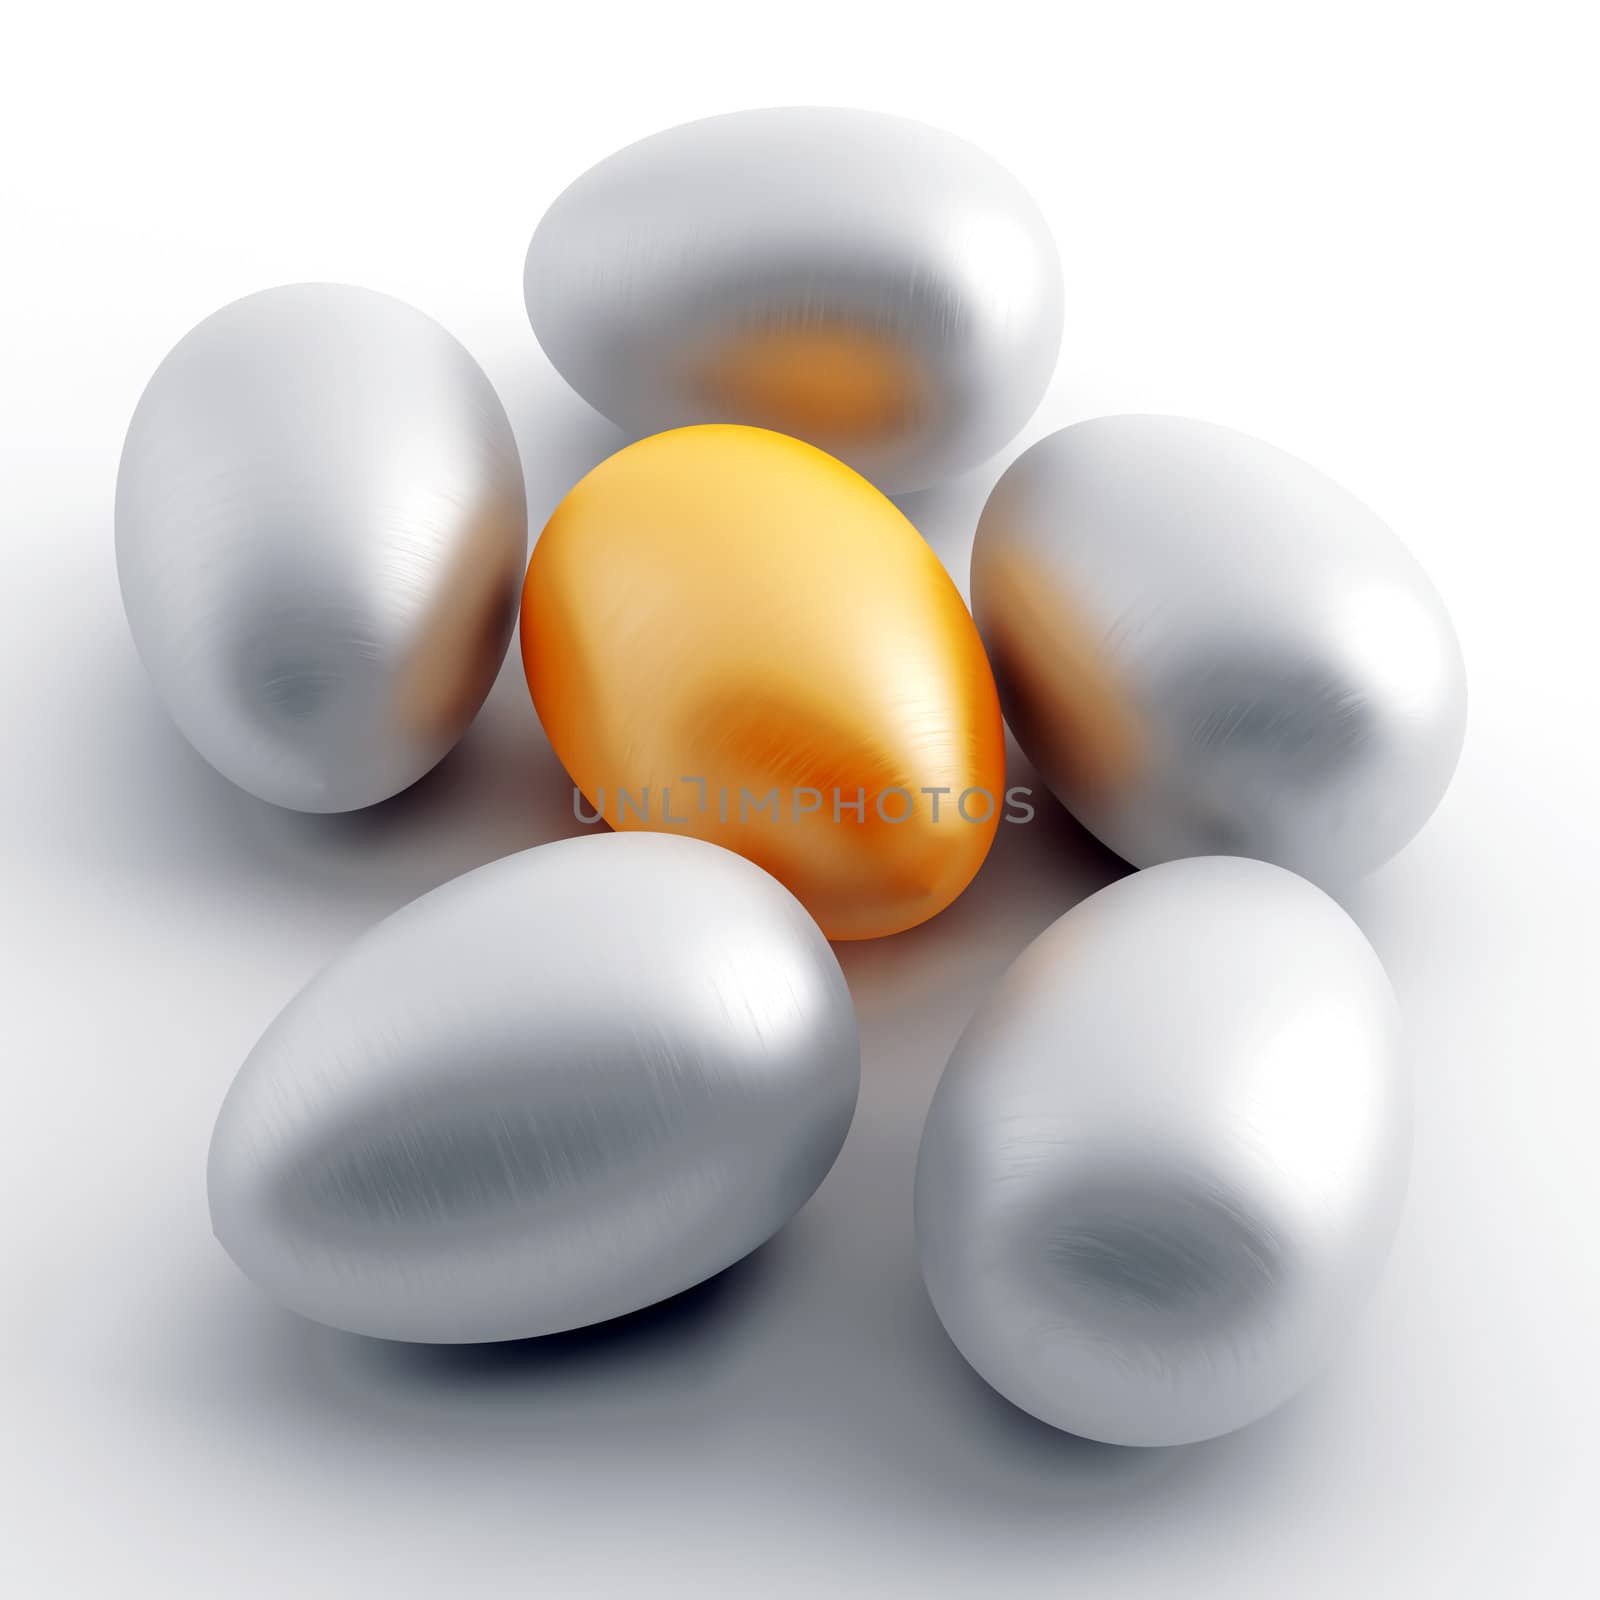 shiny silver and one gold eggs on a white background